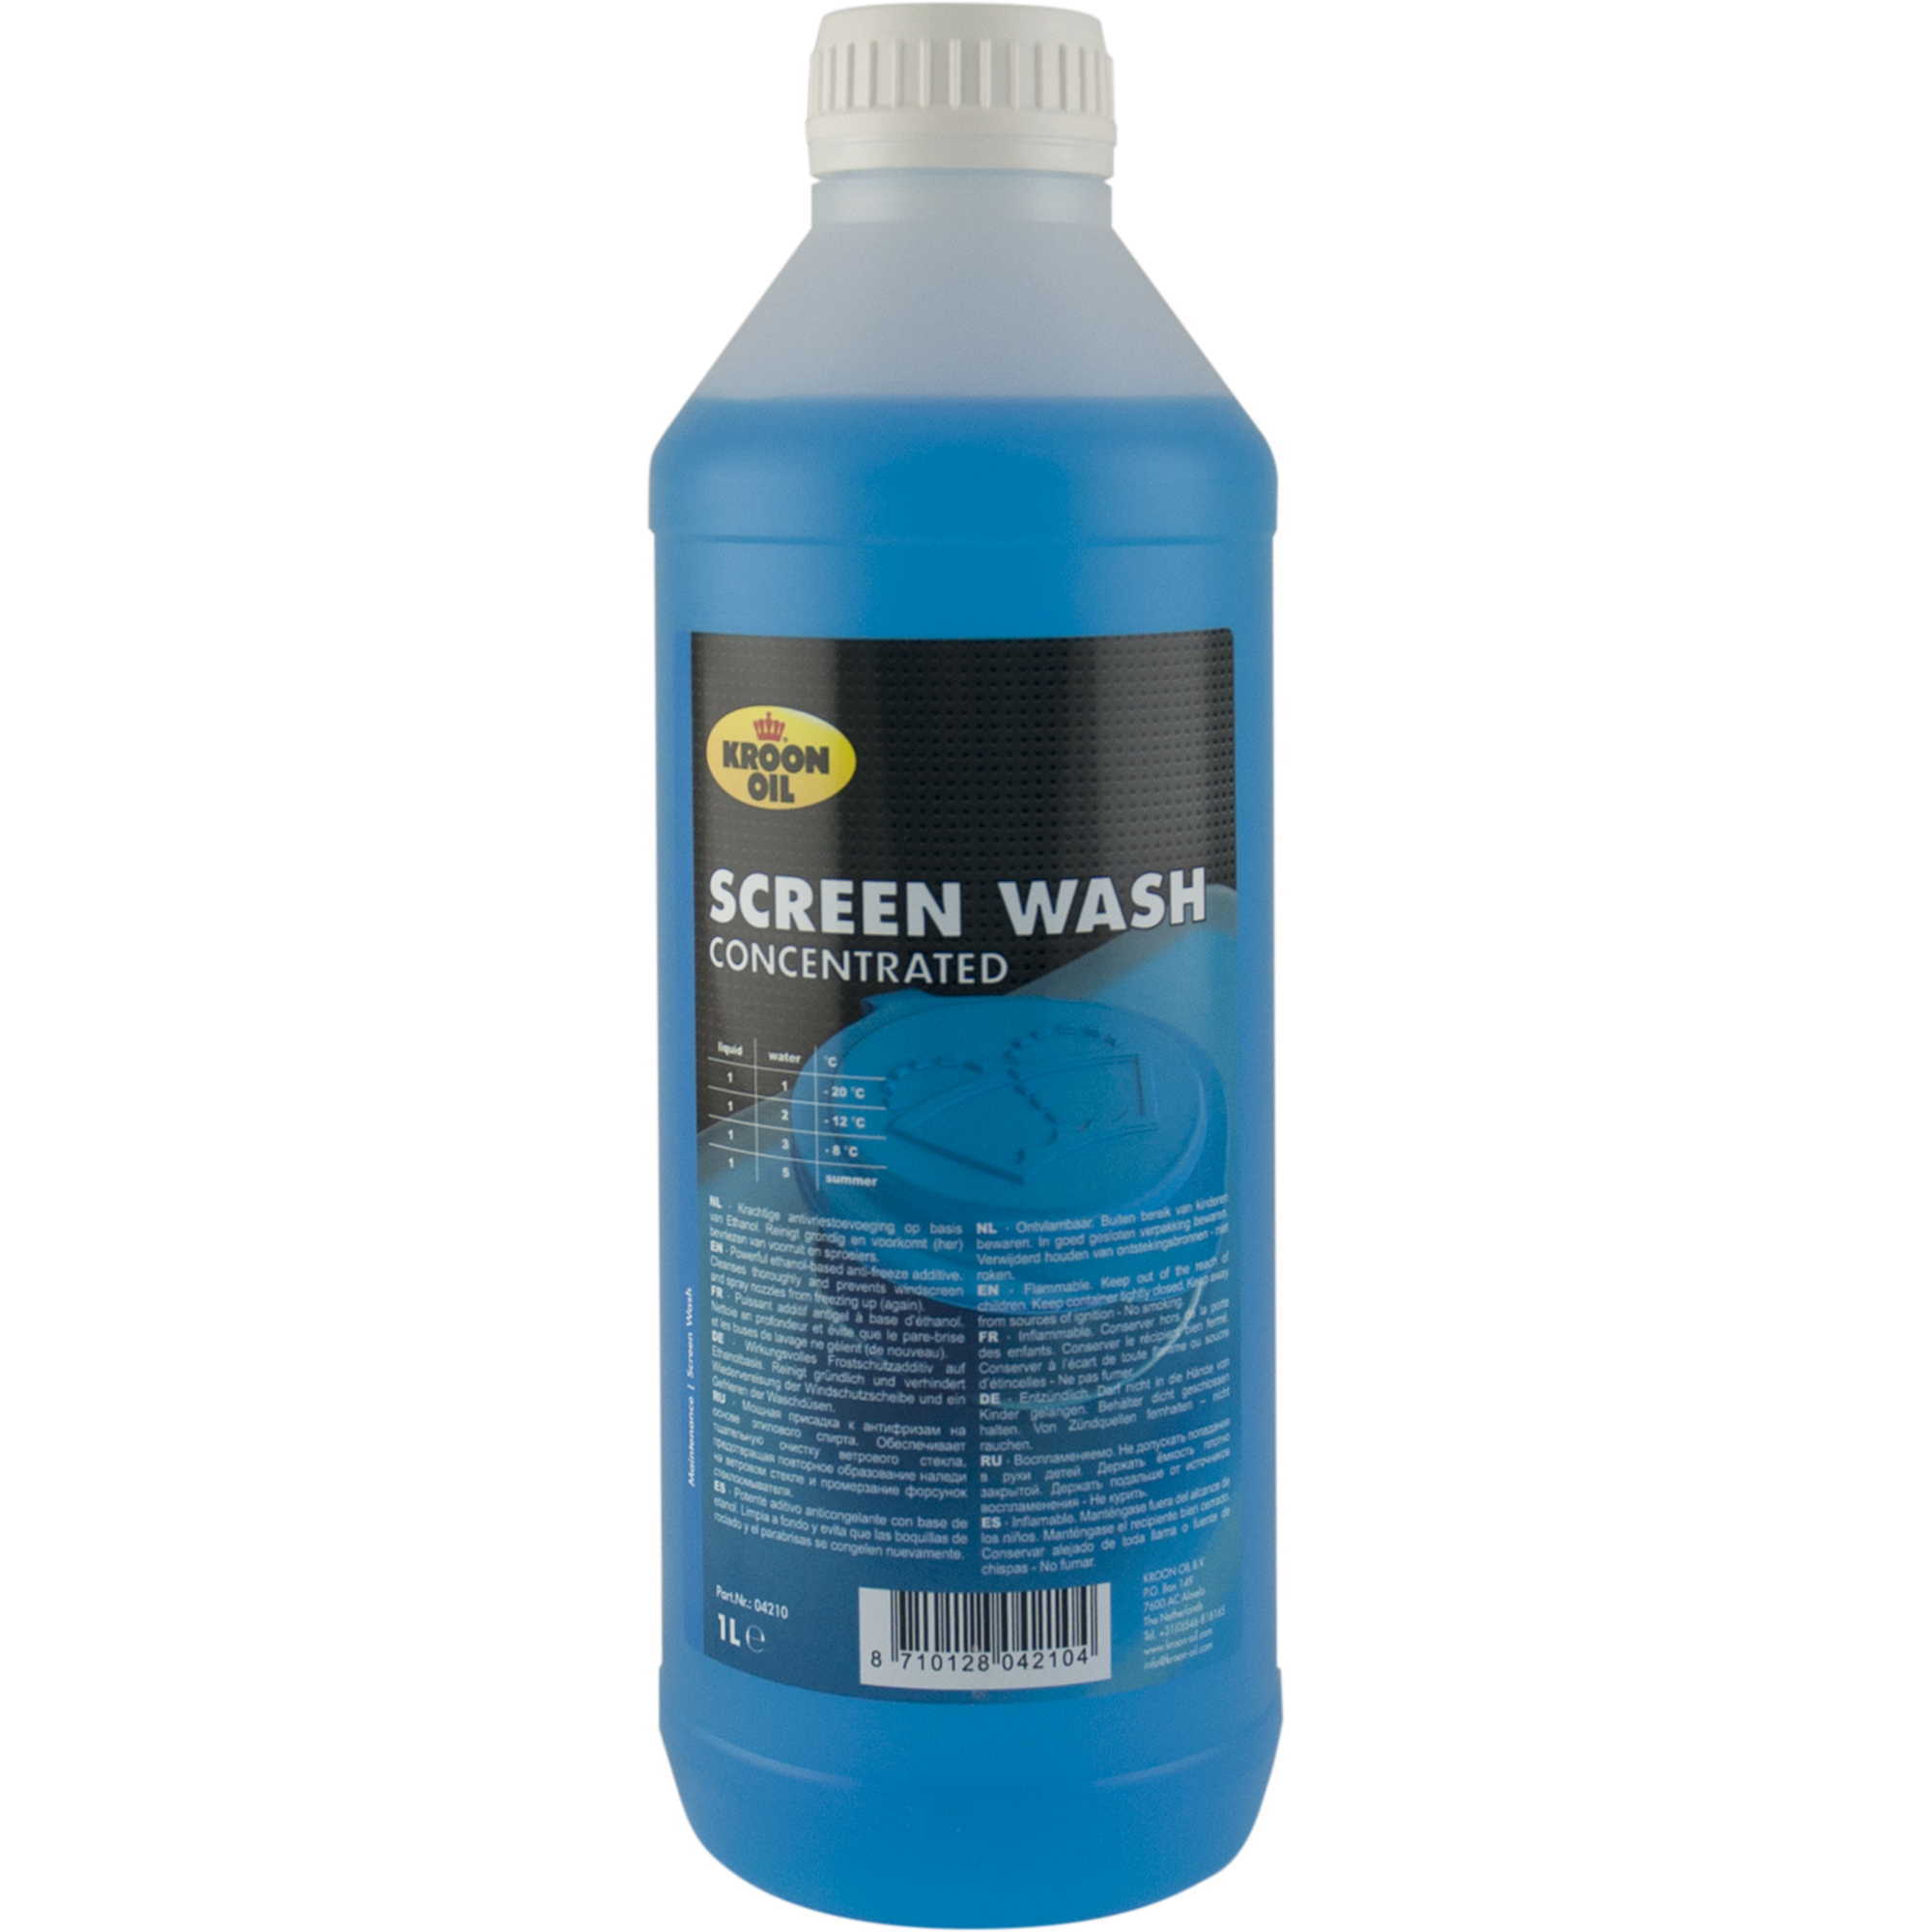 Kroon-Oil Screen Wash Concentrated, 12 x 1 lt detail 2